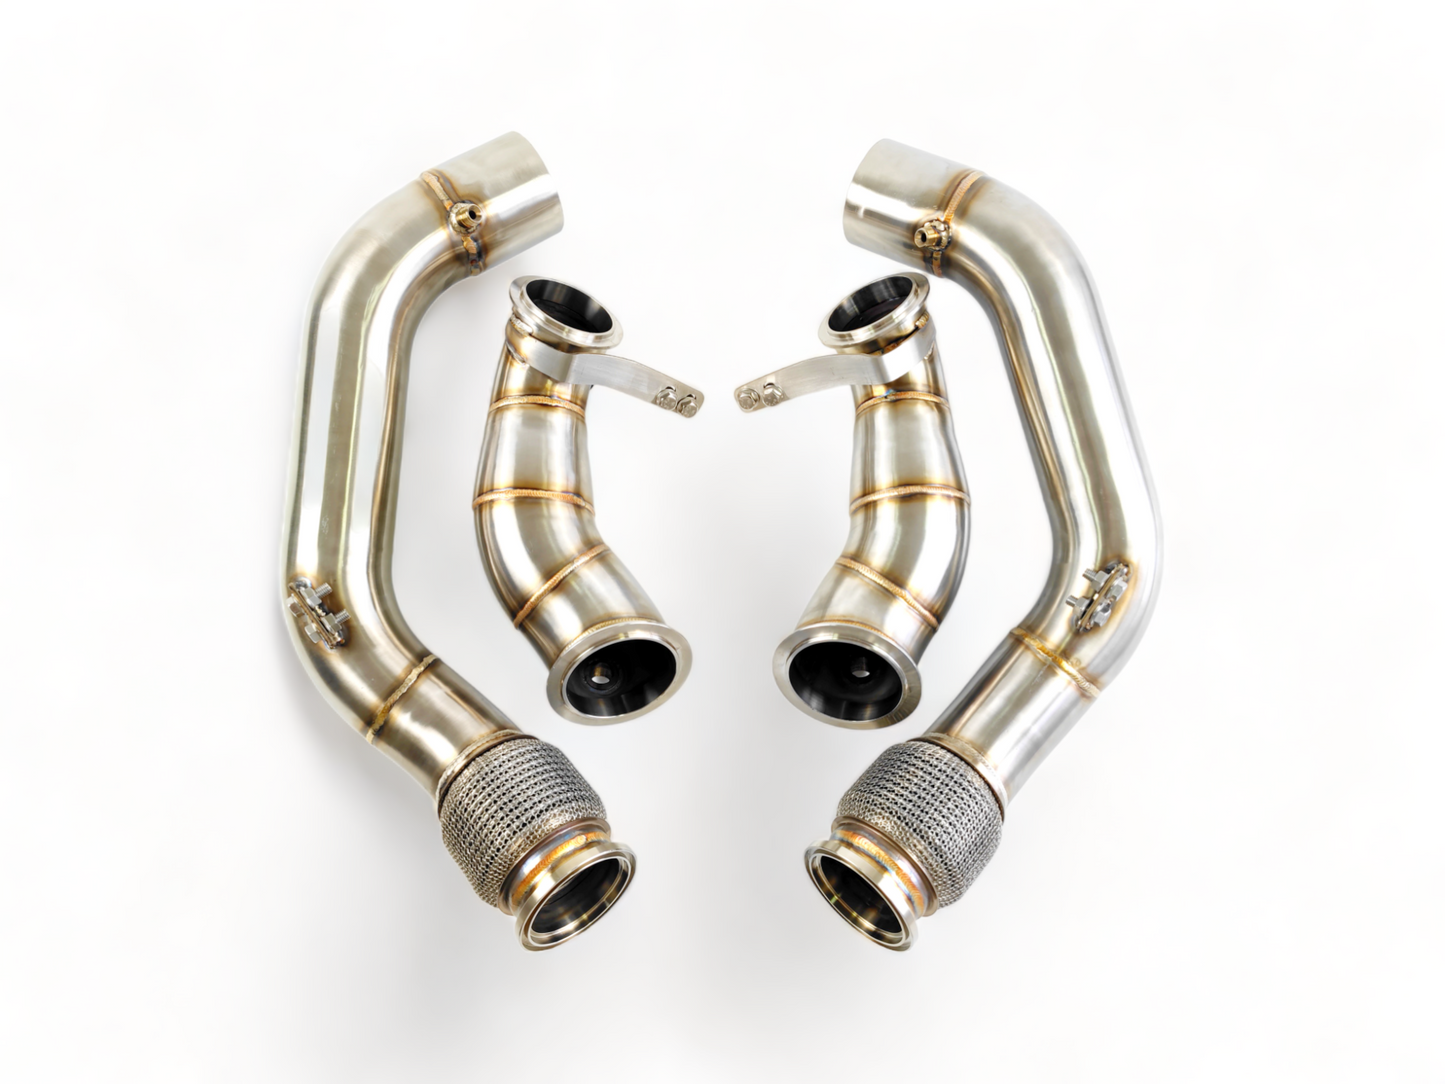 Primary and Secondary Downpipes F90 M5 / F9X M8 S63TU4